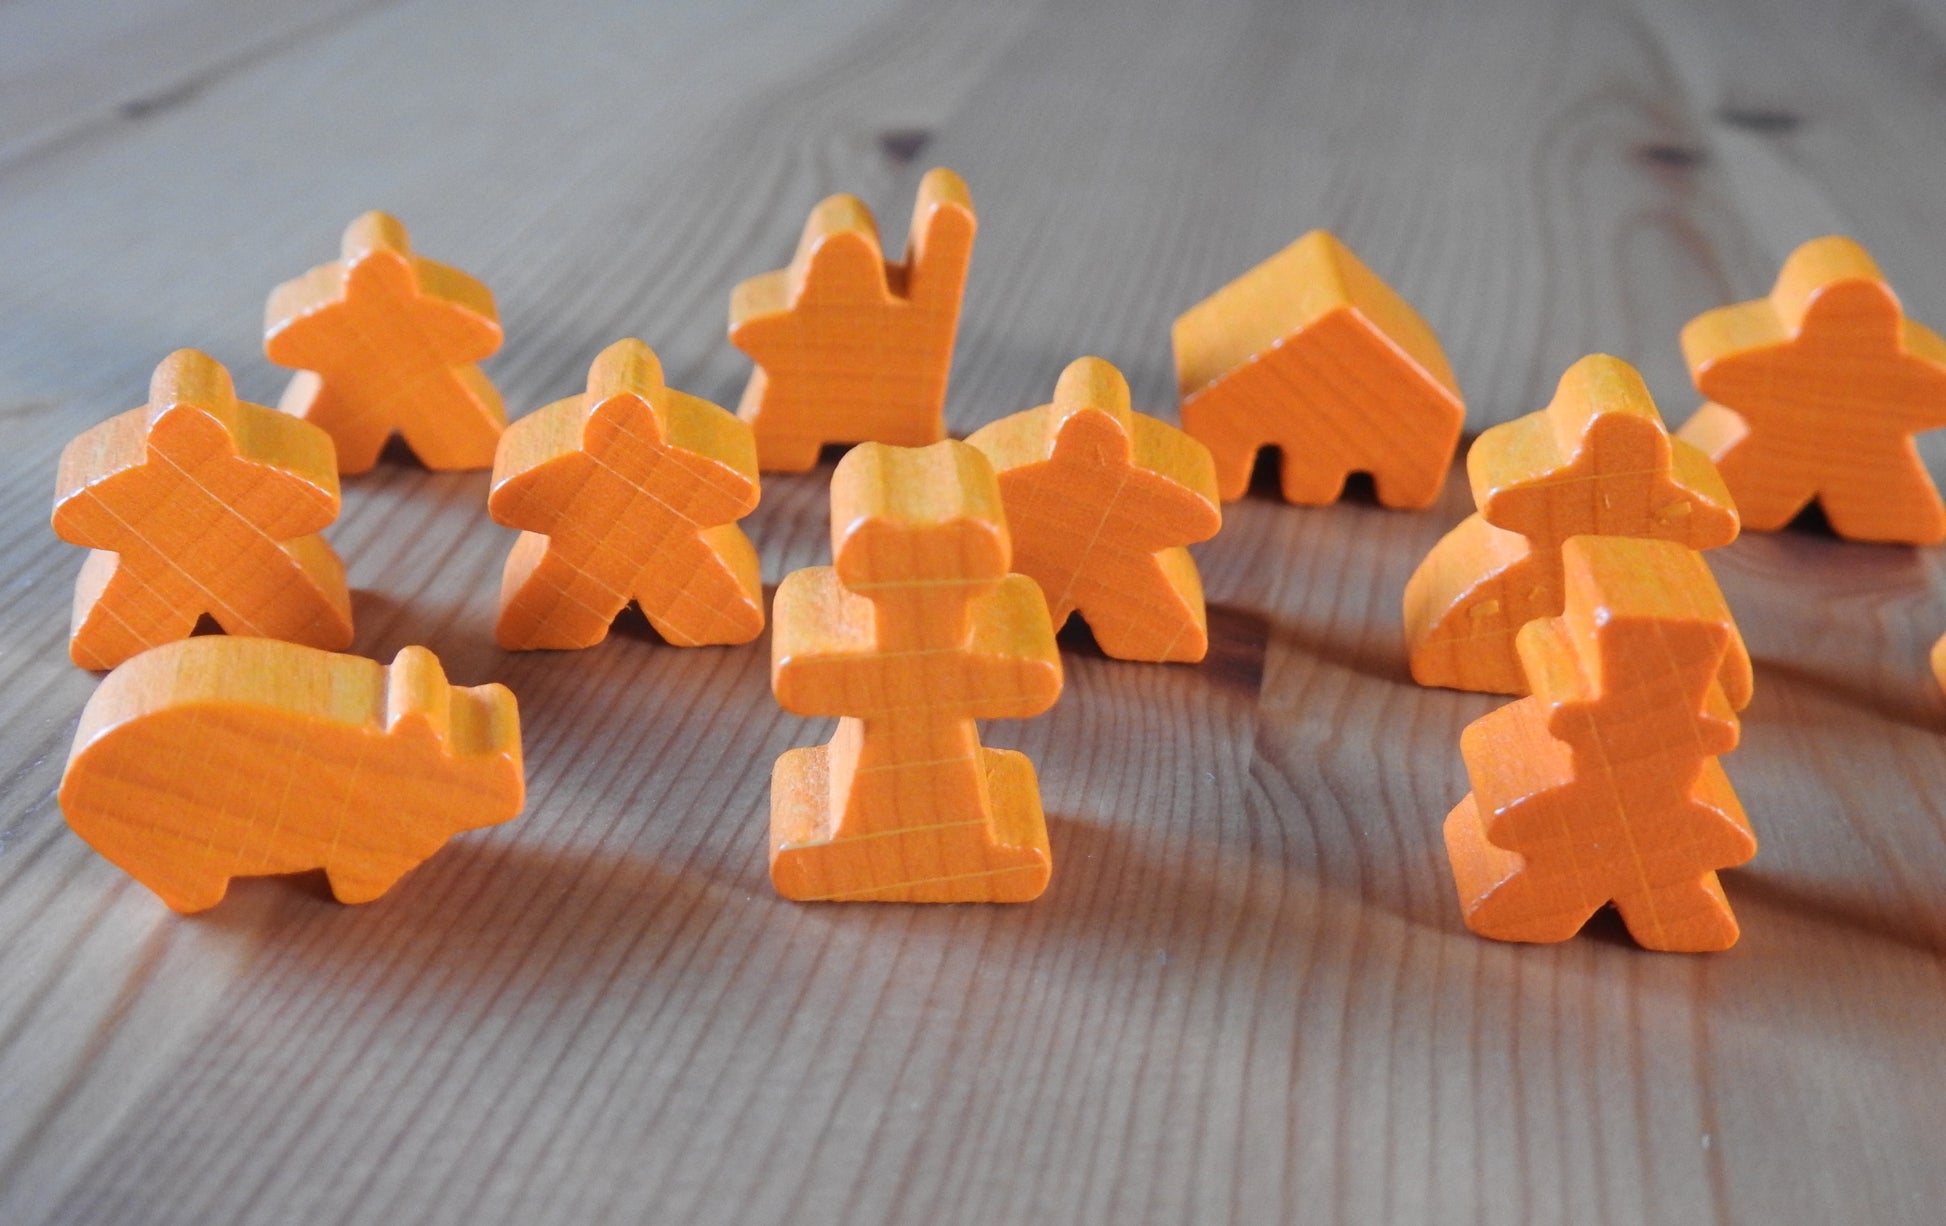 Close-up view of the orange pig, abbot and other meeple figures included.